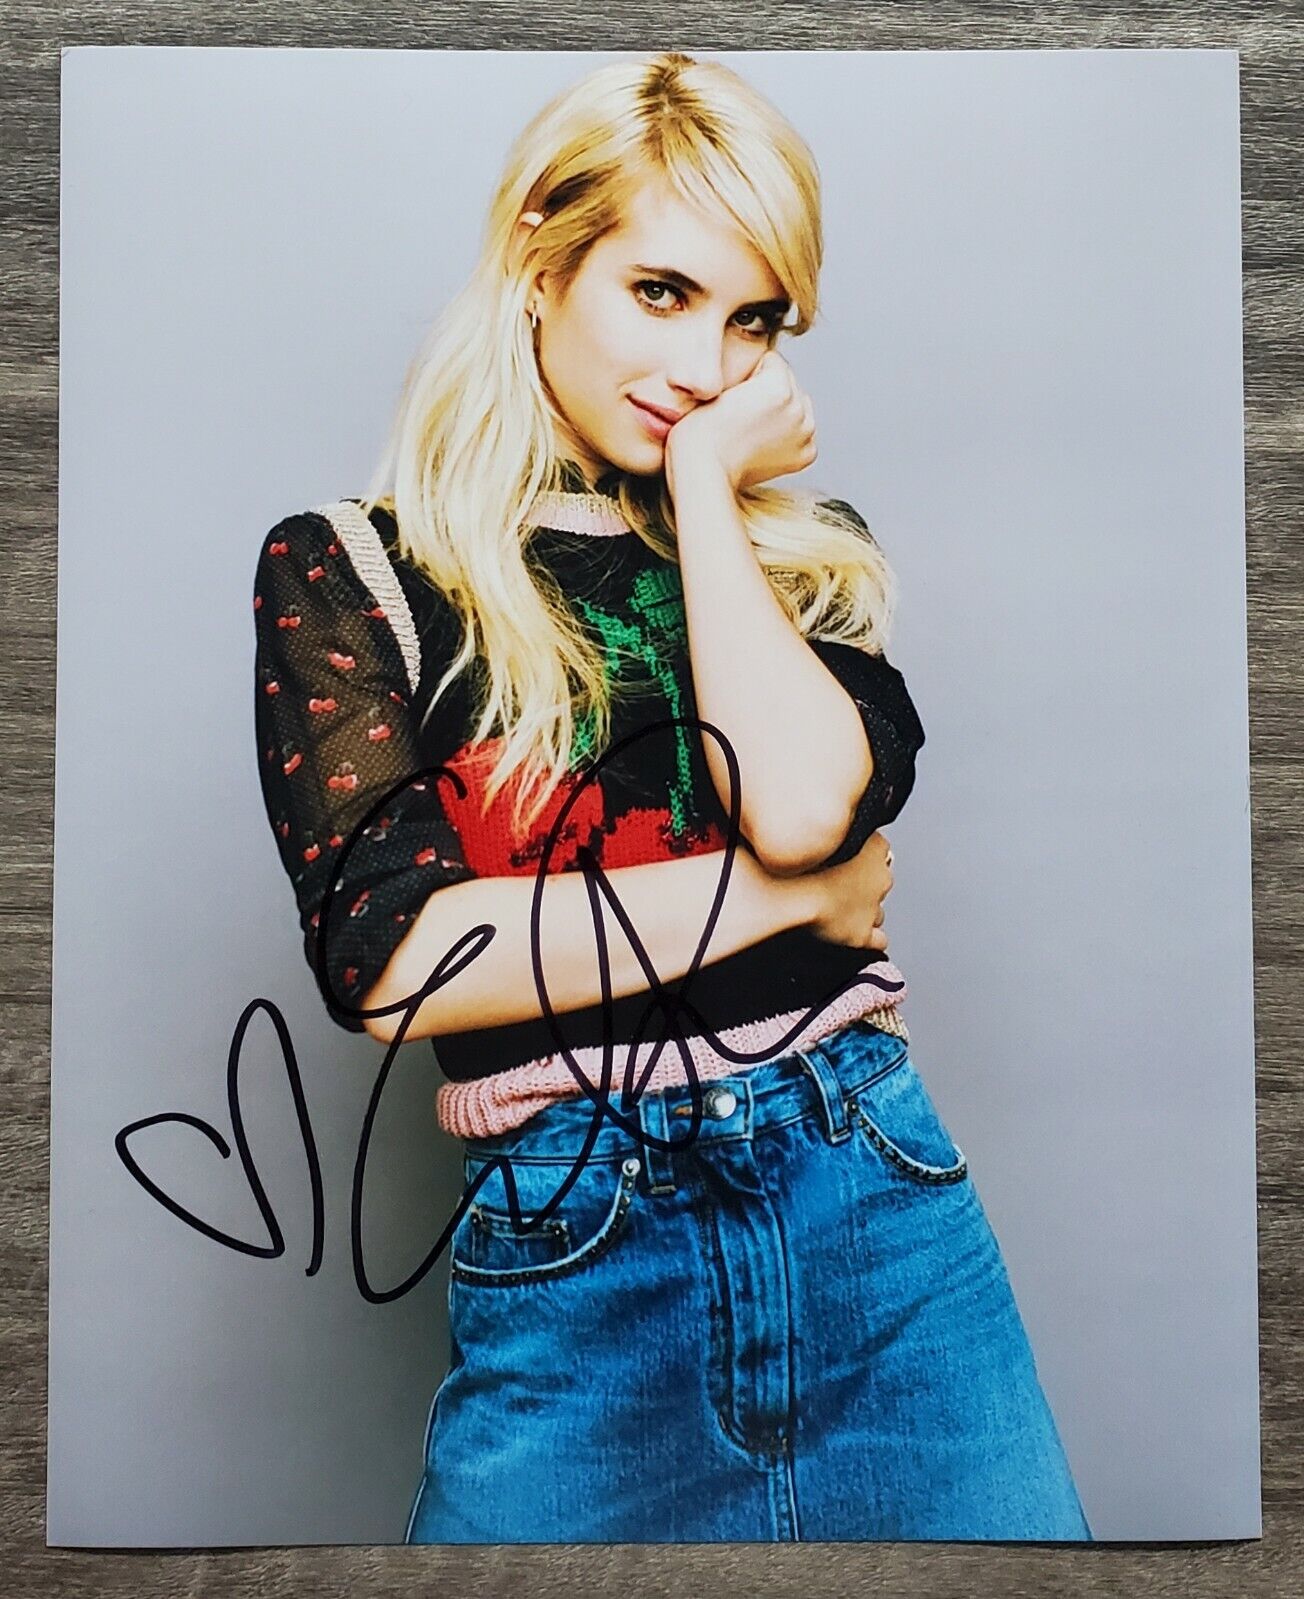 Emma Roberts Signed 8x10 Photo Poster painting Actress Scream Queens American Horror Story RAD